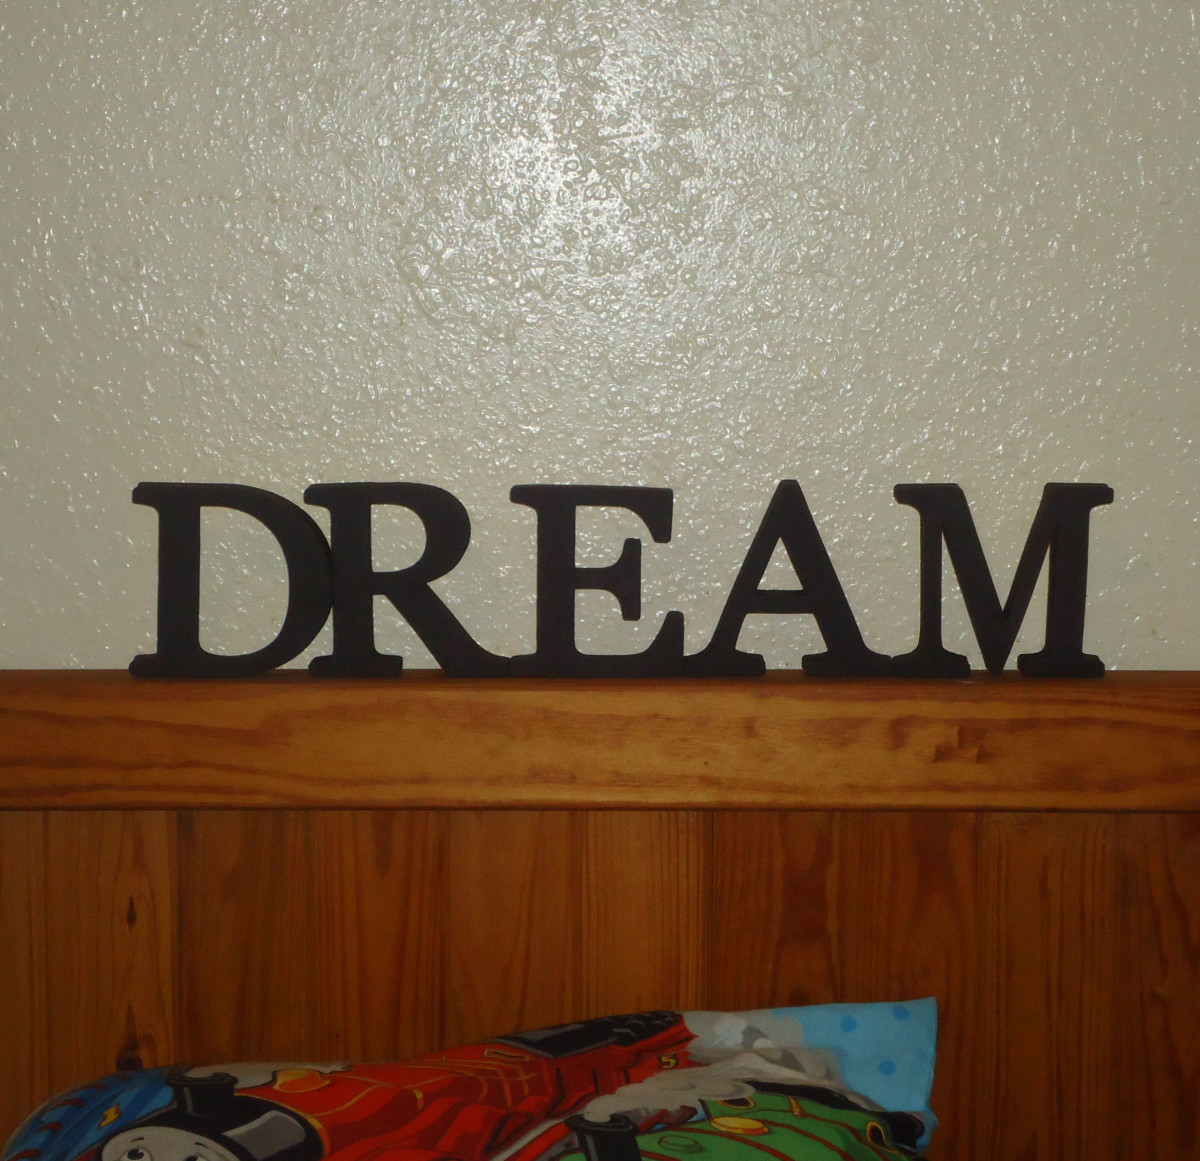 Frugal Interior Design- Make Large Decorative Words from Cheap Foam Letters